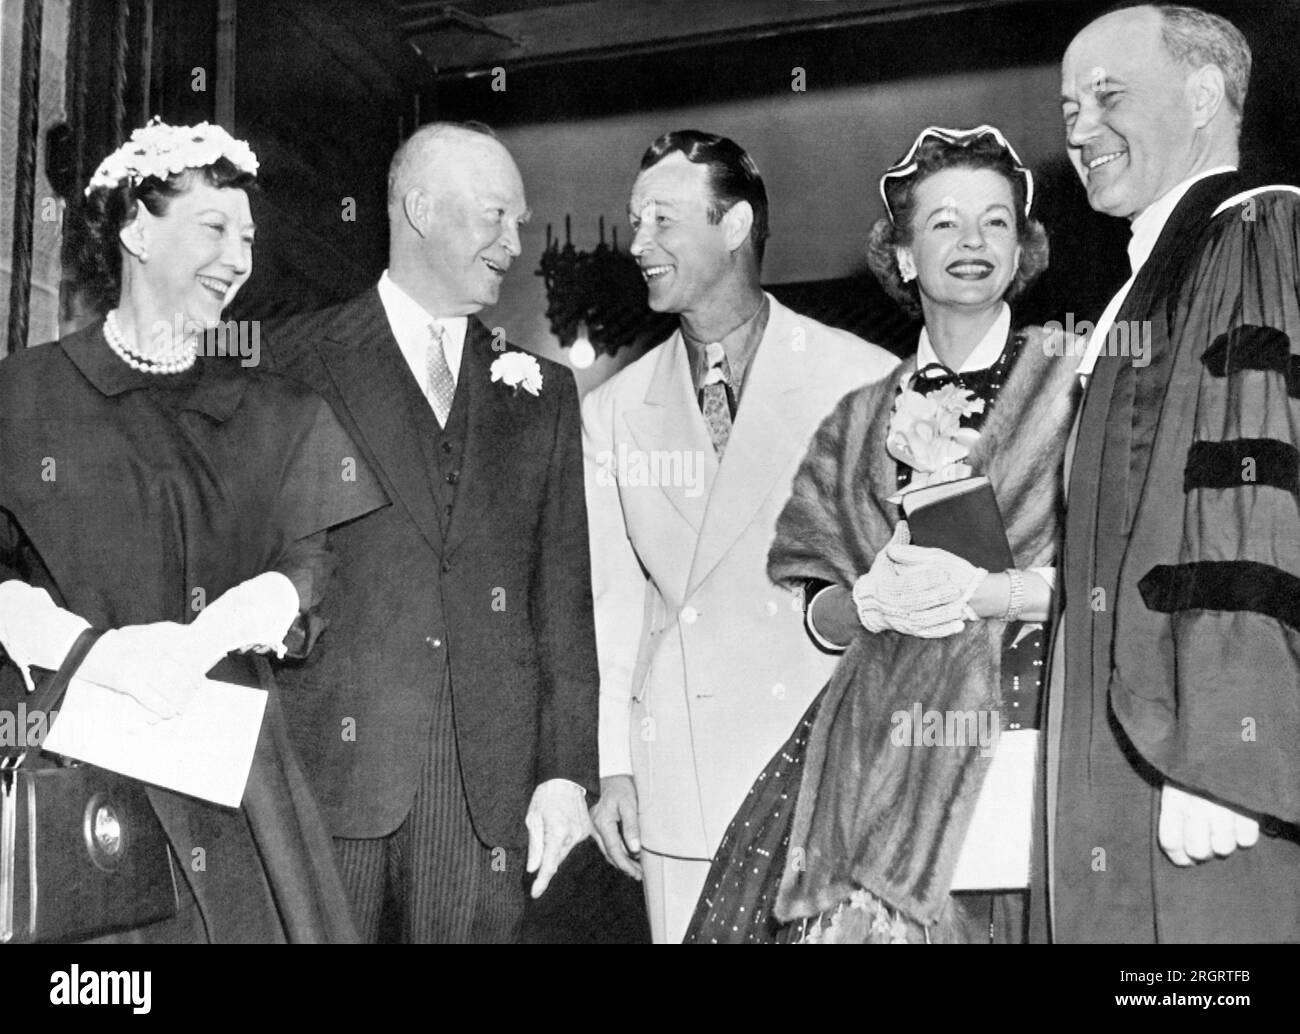 Washington, D.C.:  April 1, 1956 President and Mrs. Eisenhower talk with cowboy movie star Roy Rogers and his wife, Dale Evans, at the National Presbyterian Church here where they both attended Easter services. Stock Photo